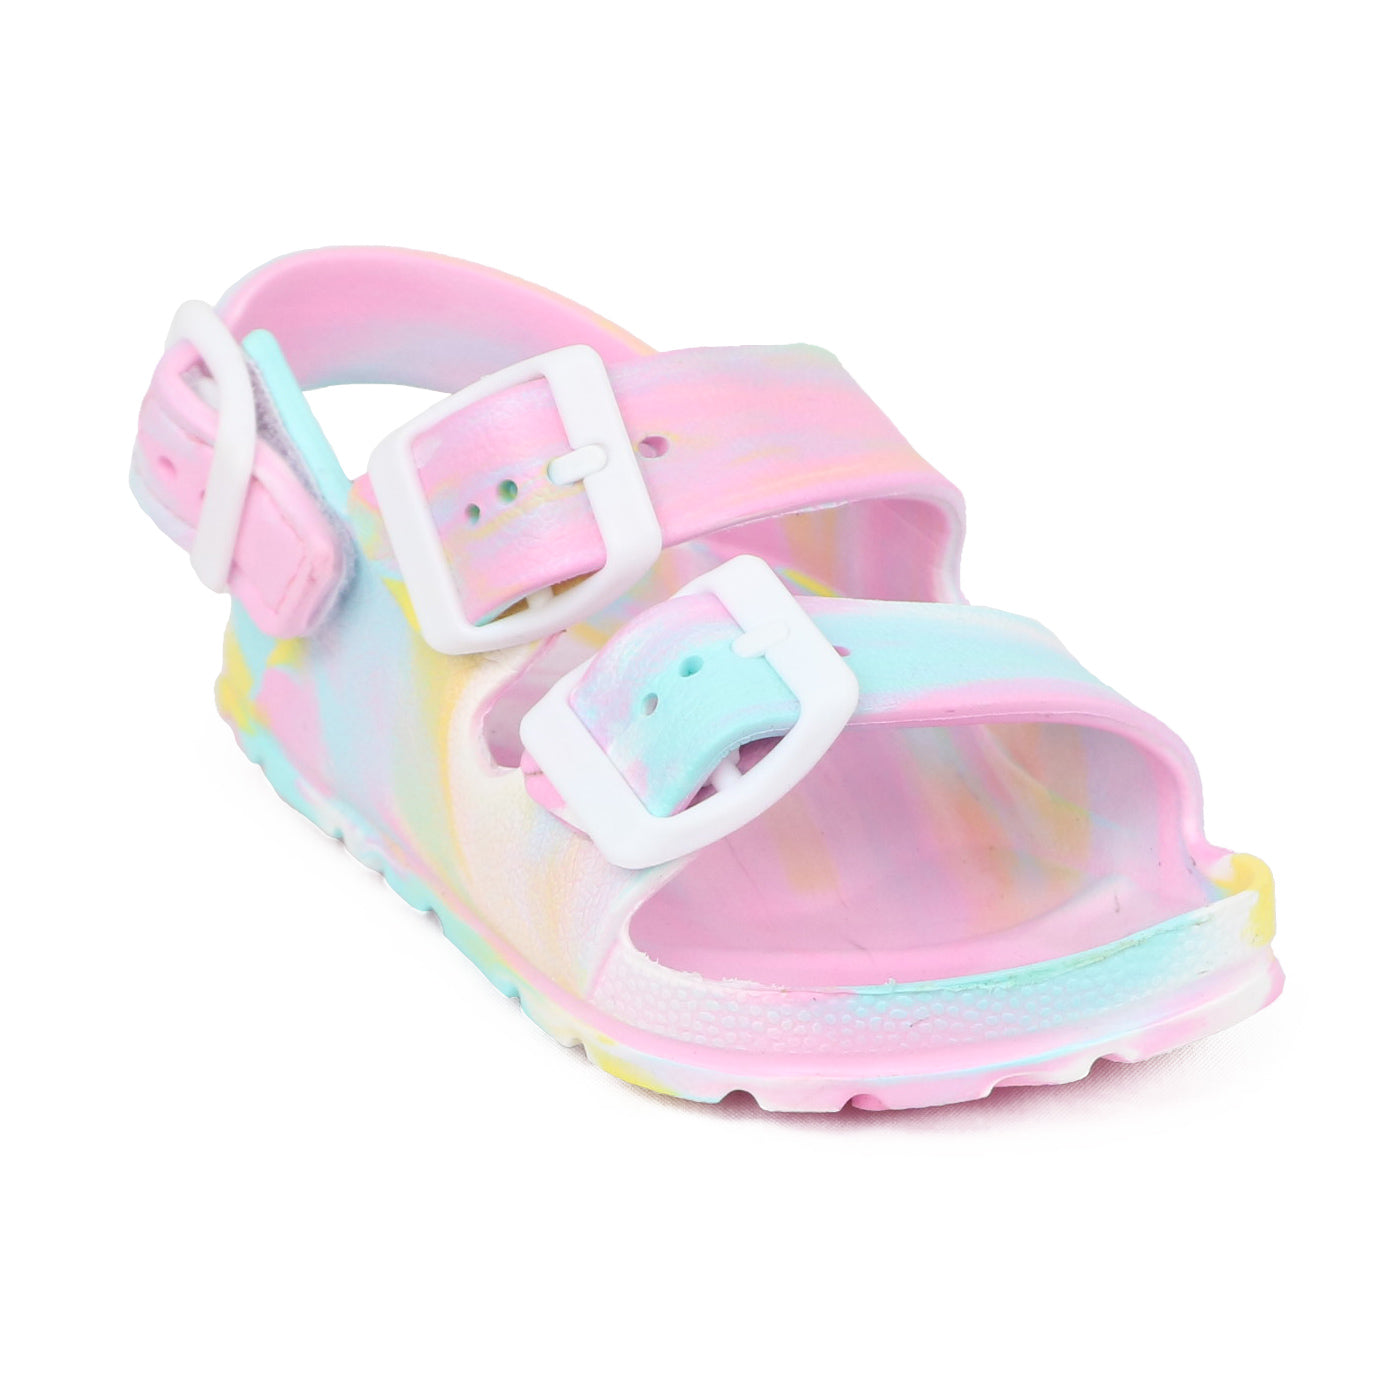 First Steps By Stepping Stones Baby and Infant Girl Sizes 7-10 Tie Dye Buckle Sandal